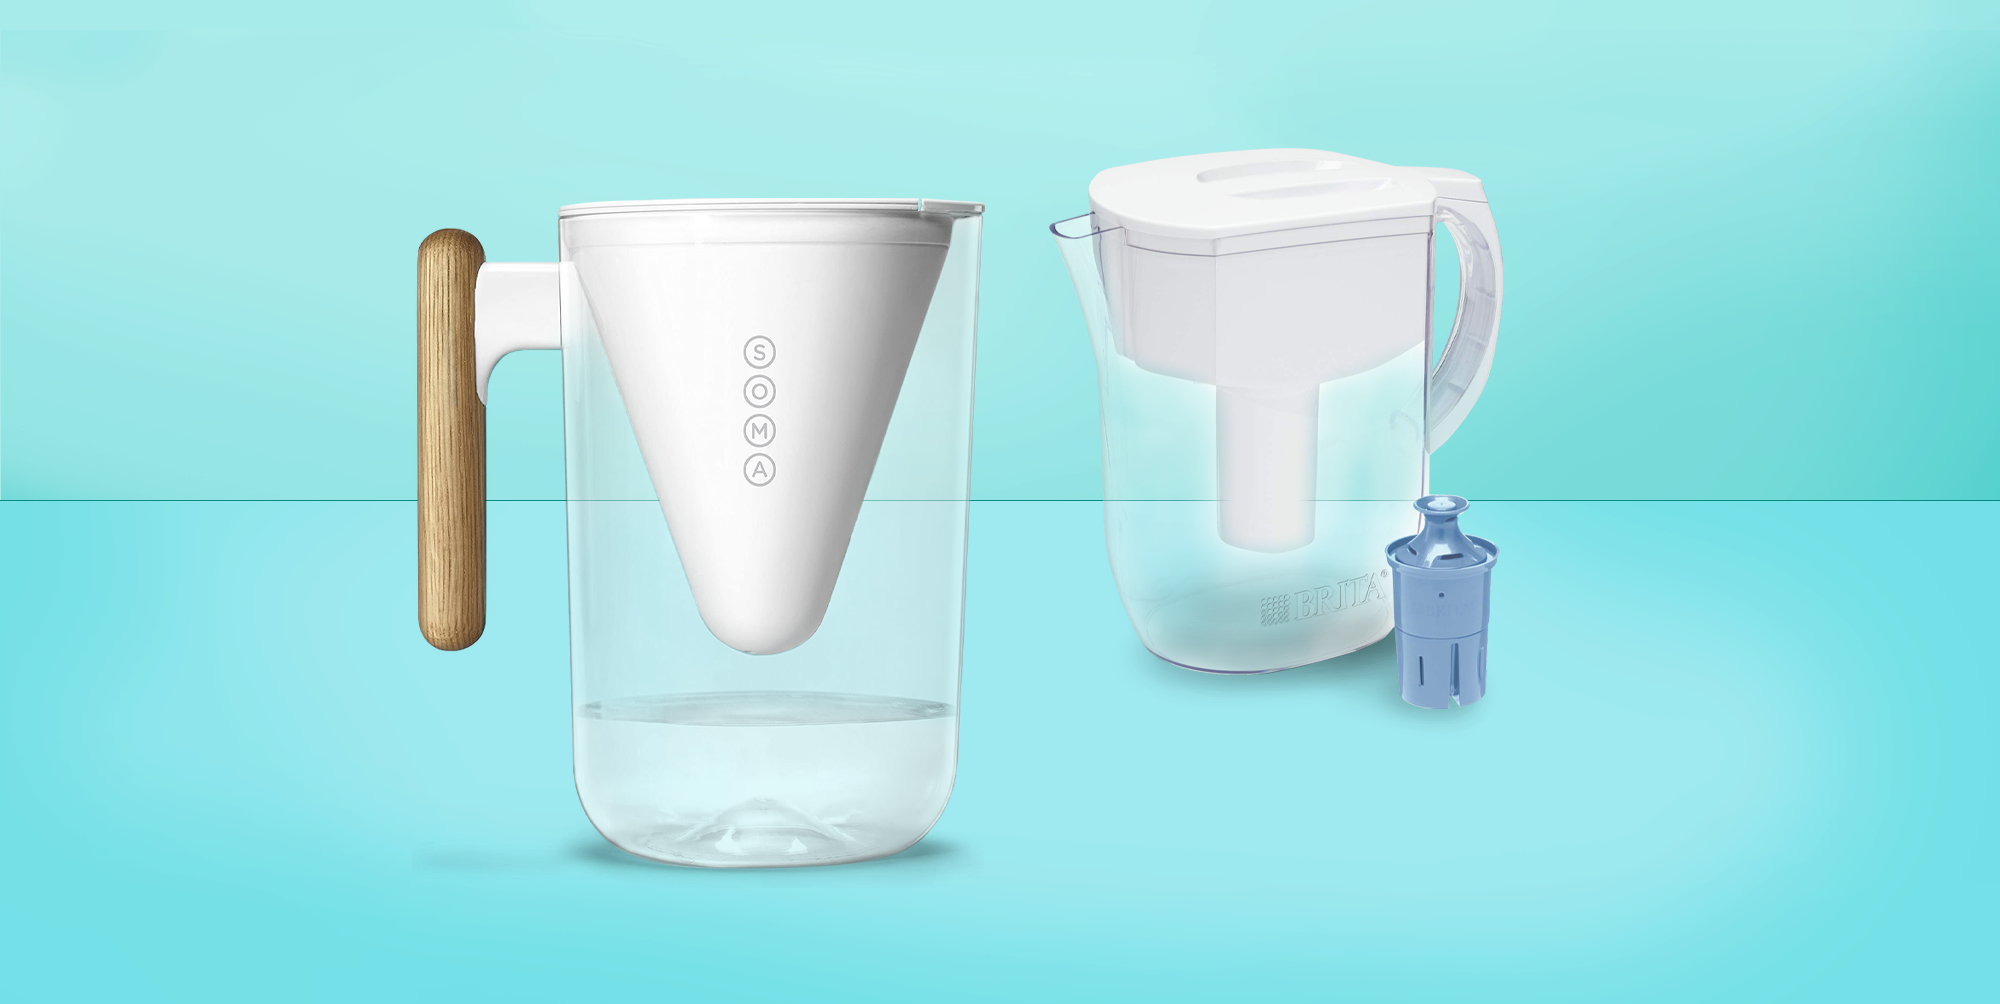 I cleaned the filter in a water pitcher – and I doubled its use in under 30 minutes